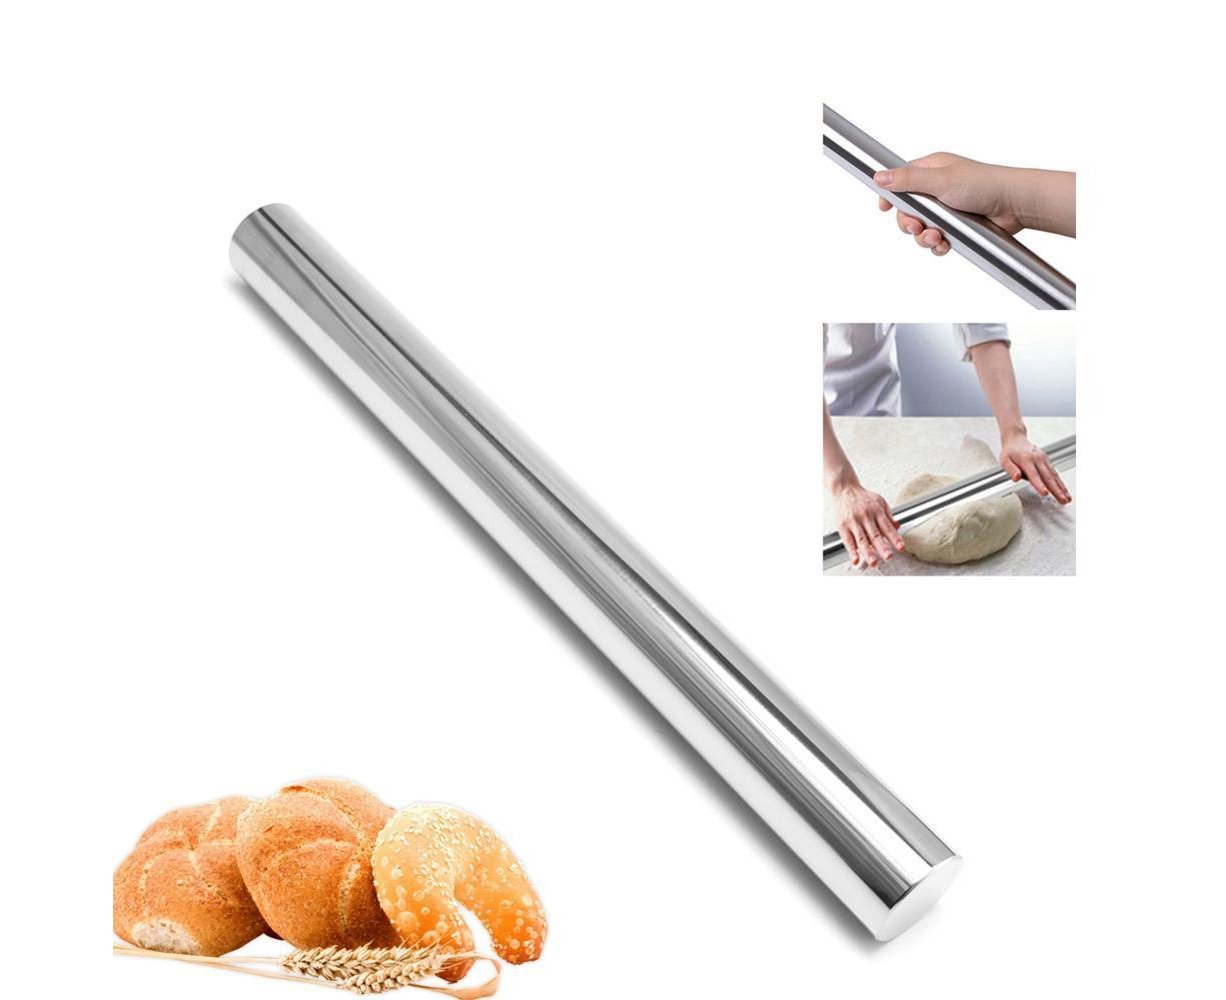 Fliyeong Durable Stainless Steel Dough Rolling Pin Baking Cooking Tool Roller for Pasta Cookies Pizza Dough Tool 